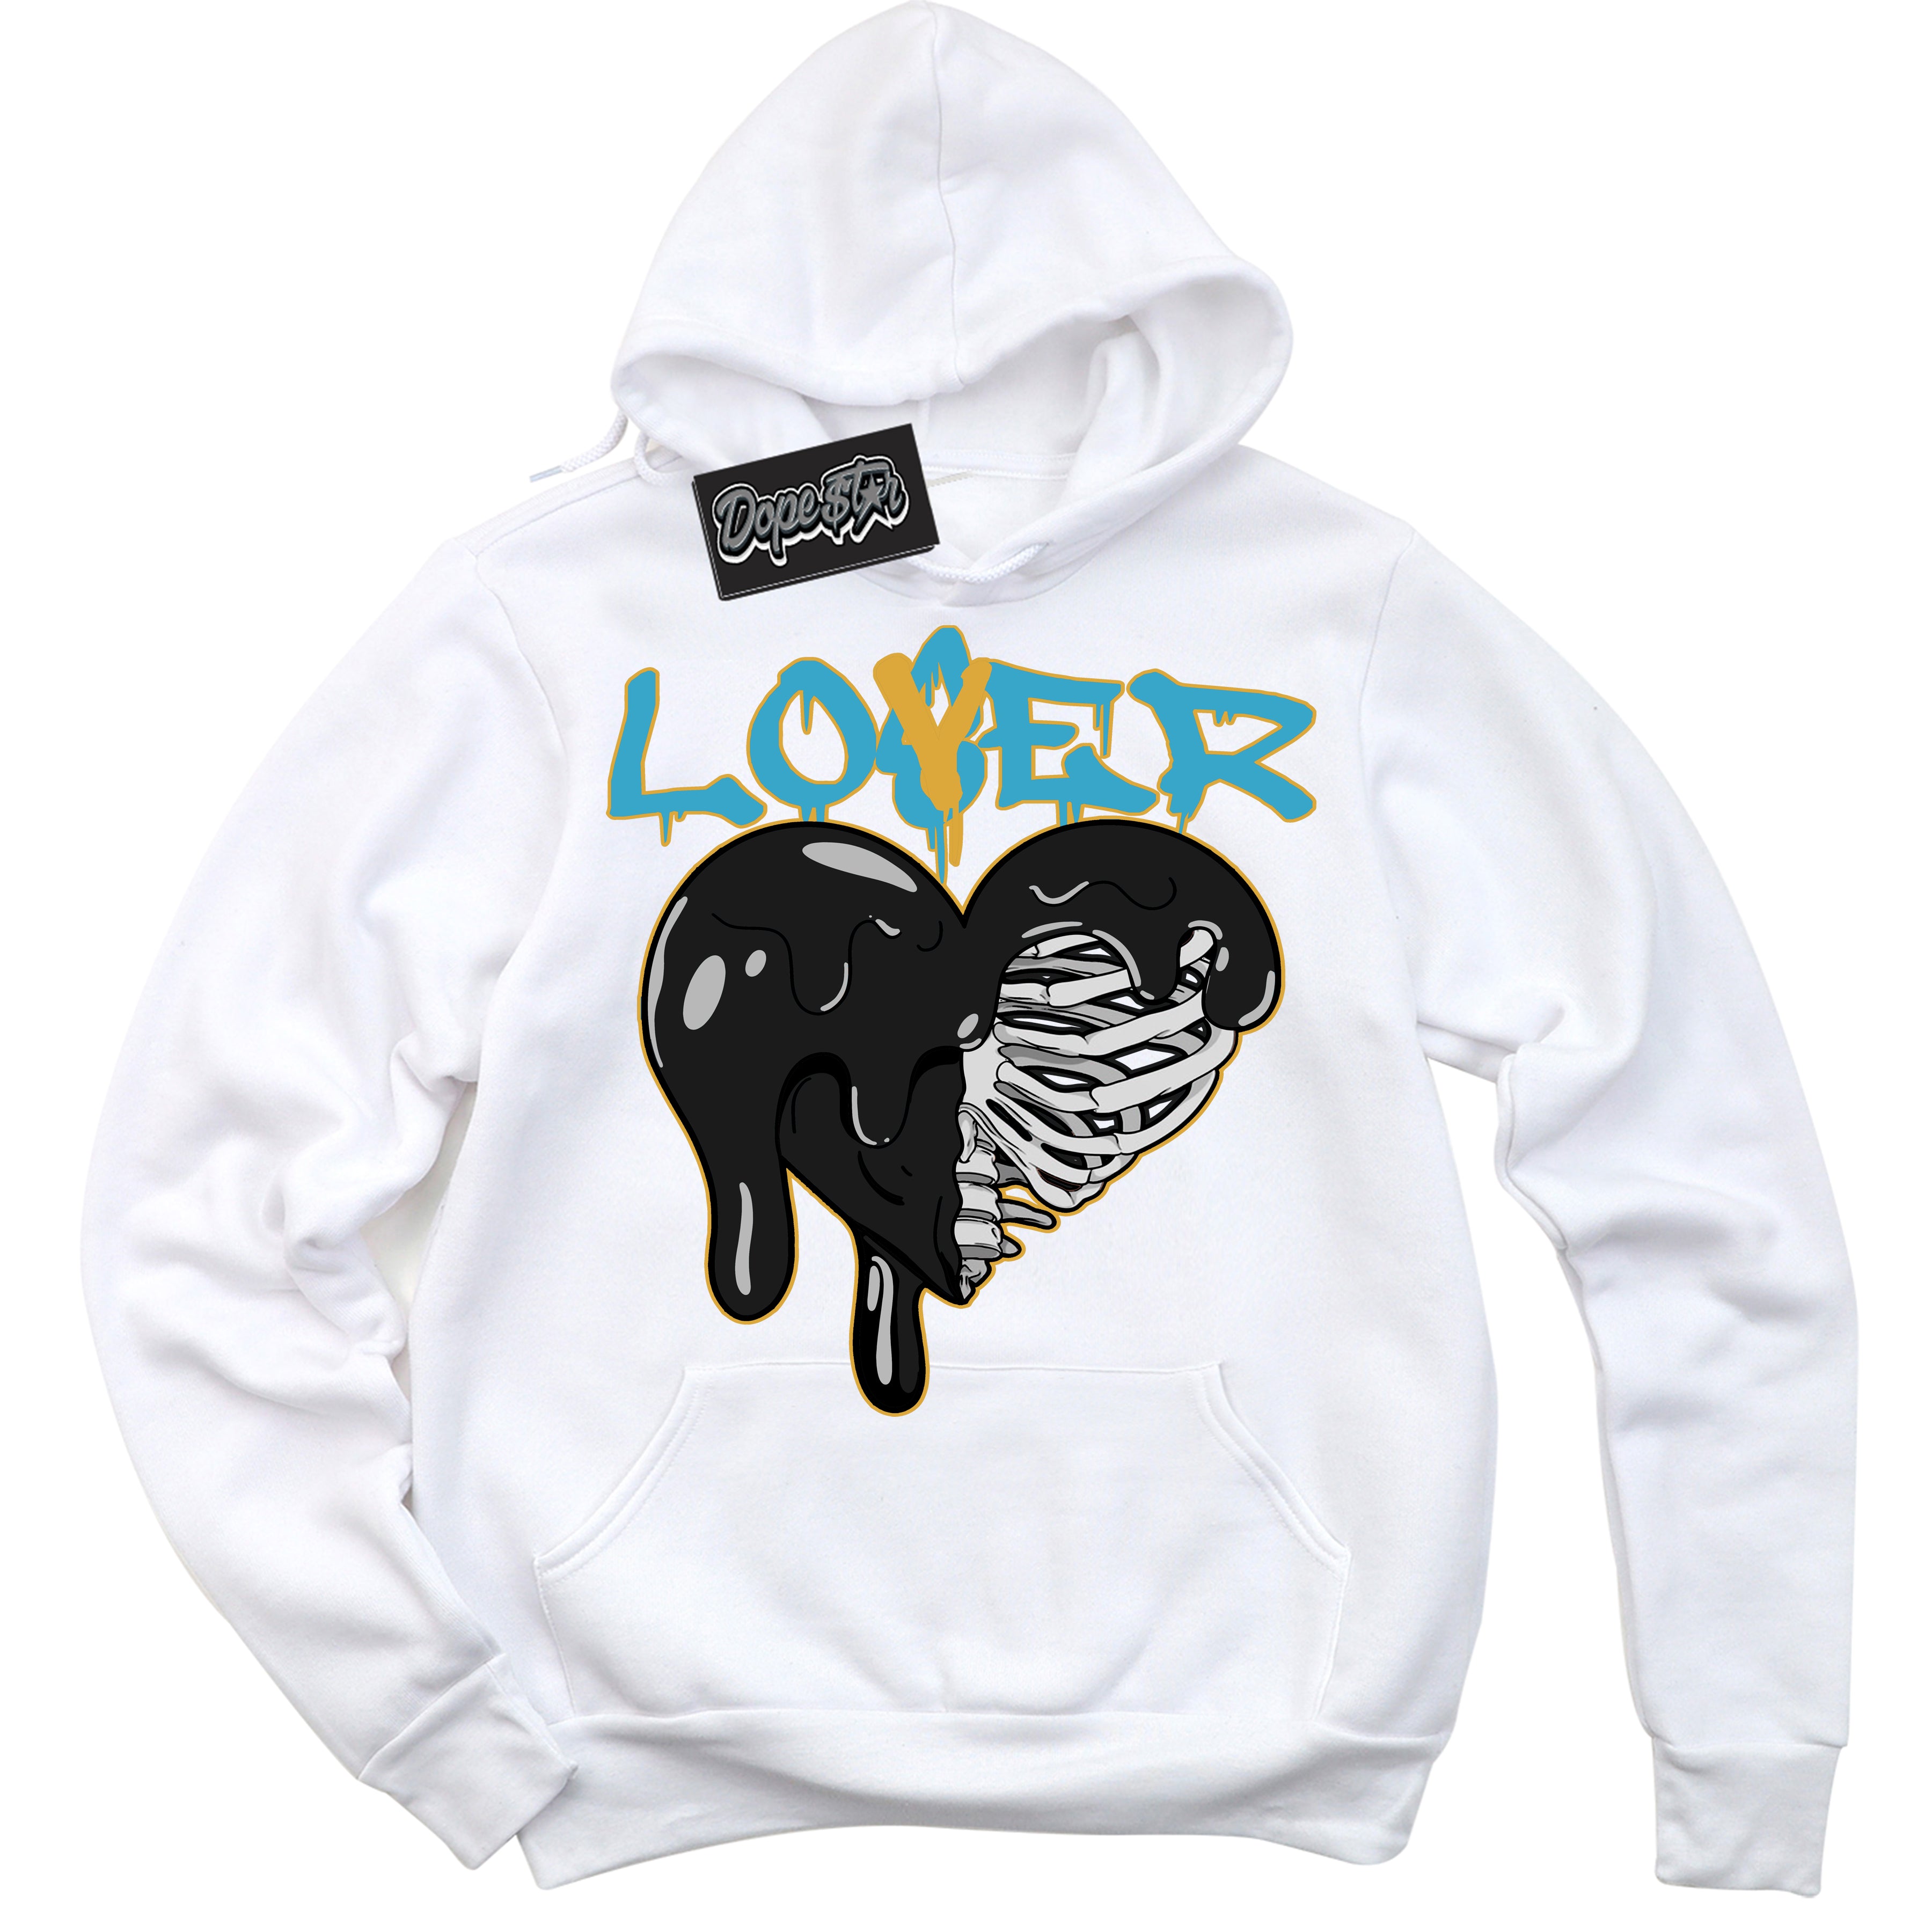 Cool White Hoodie with “ Lover Loser ”  design that Perfectly Matches Aqua 5s Sneakers.